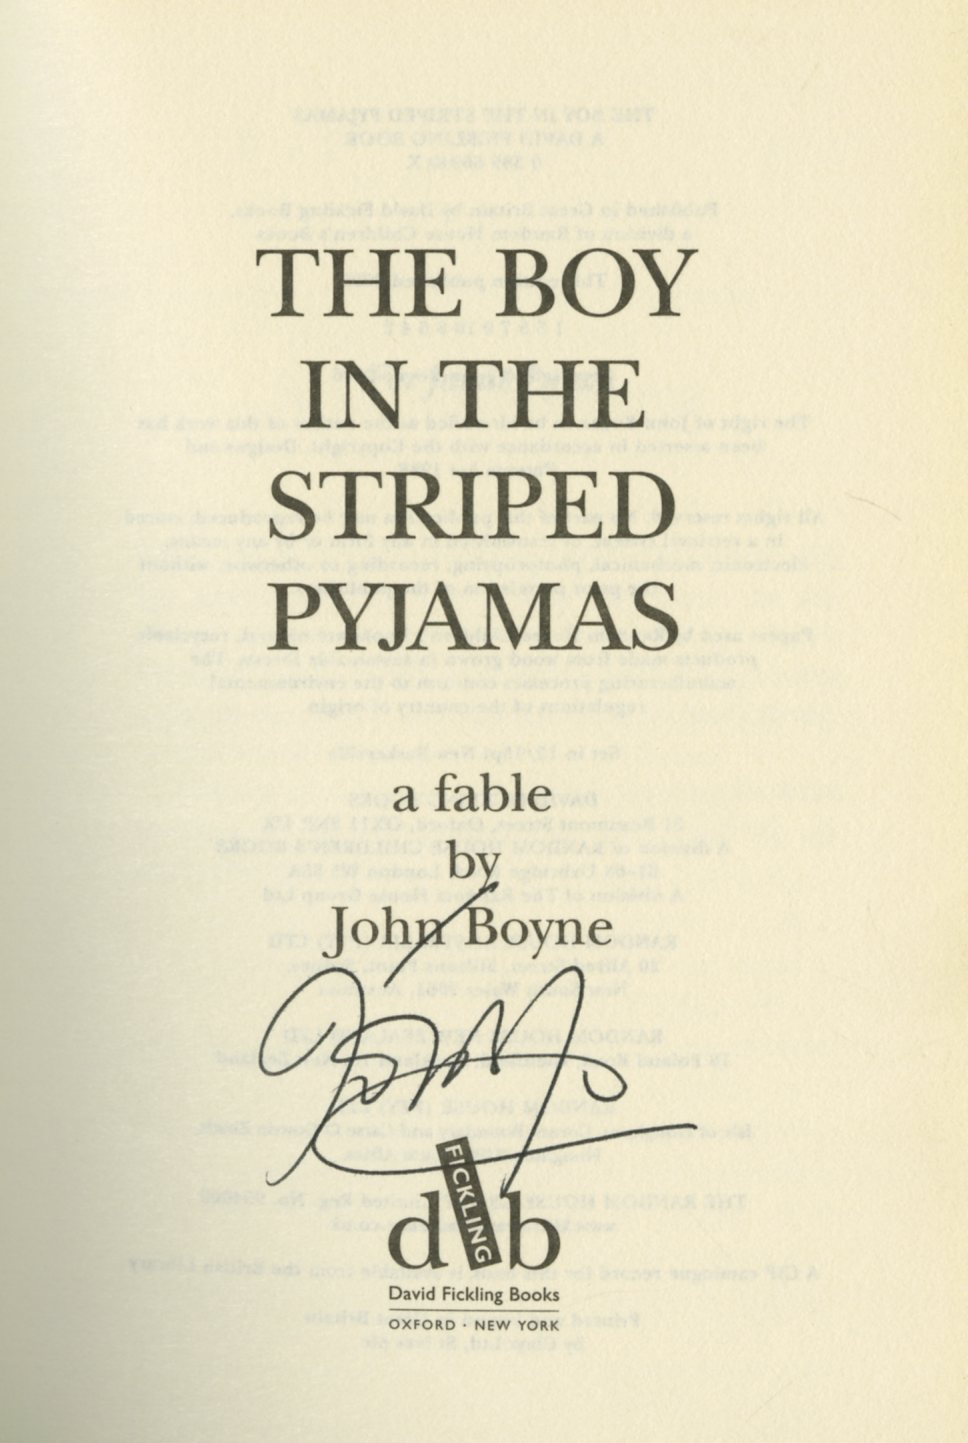 Signed by the Author Boyne (John) The Boy in the Striped Pyjamas, 8vo,